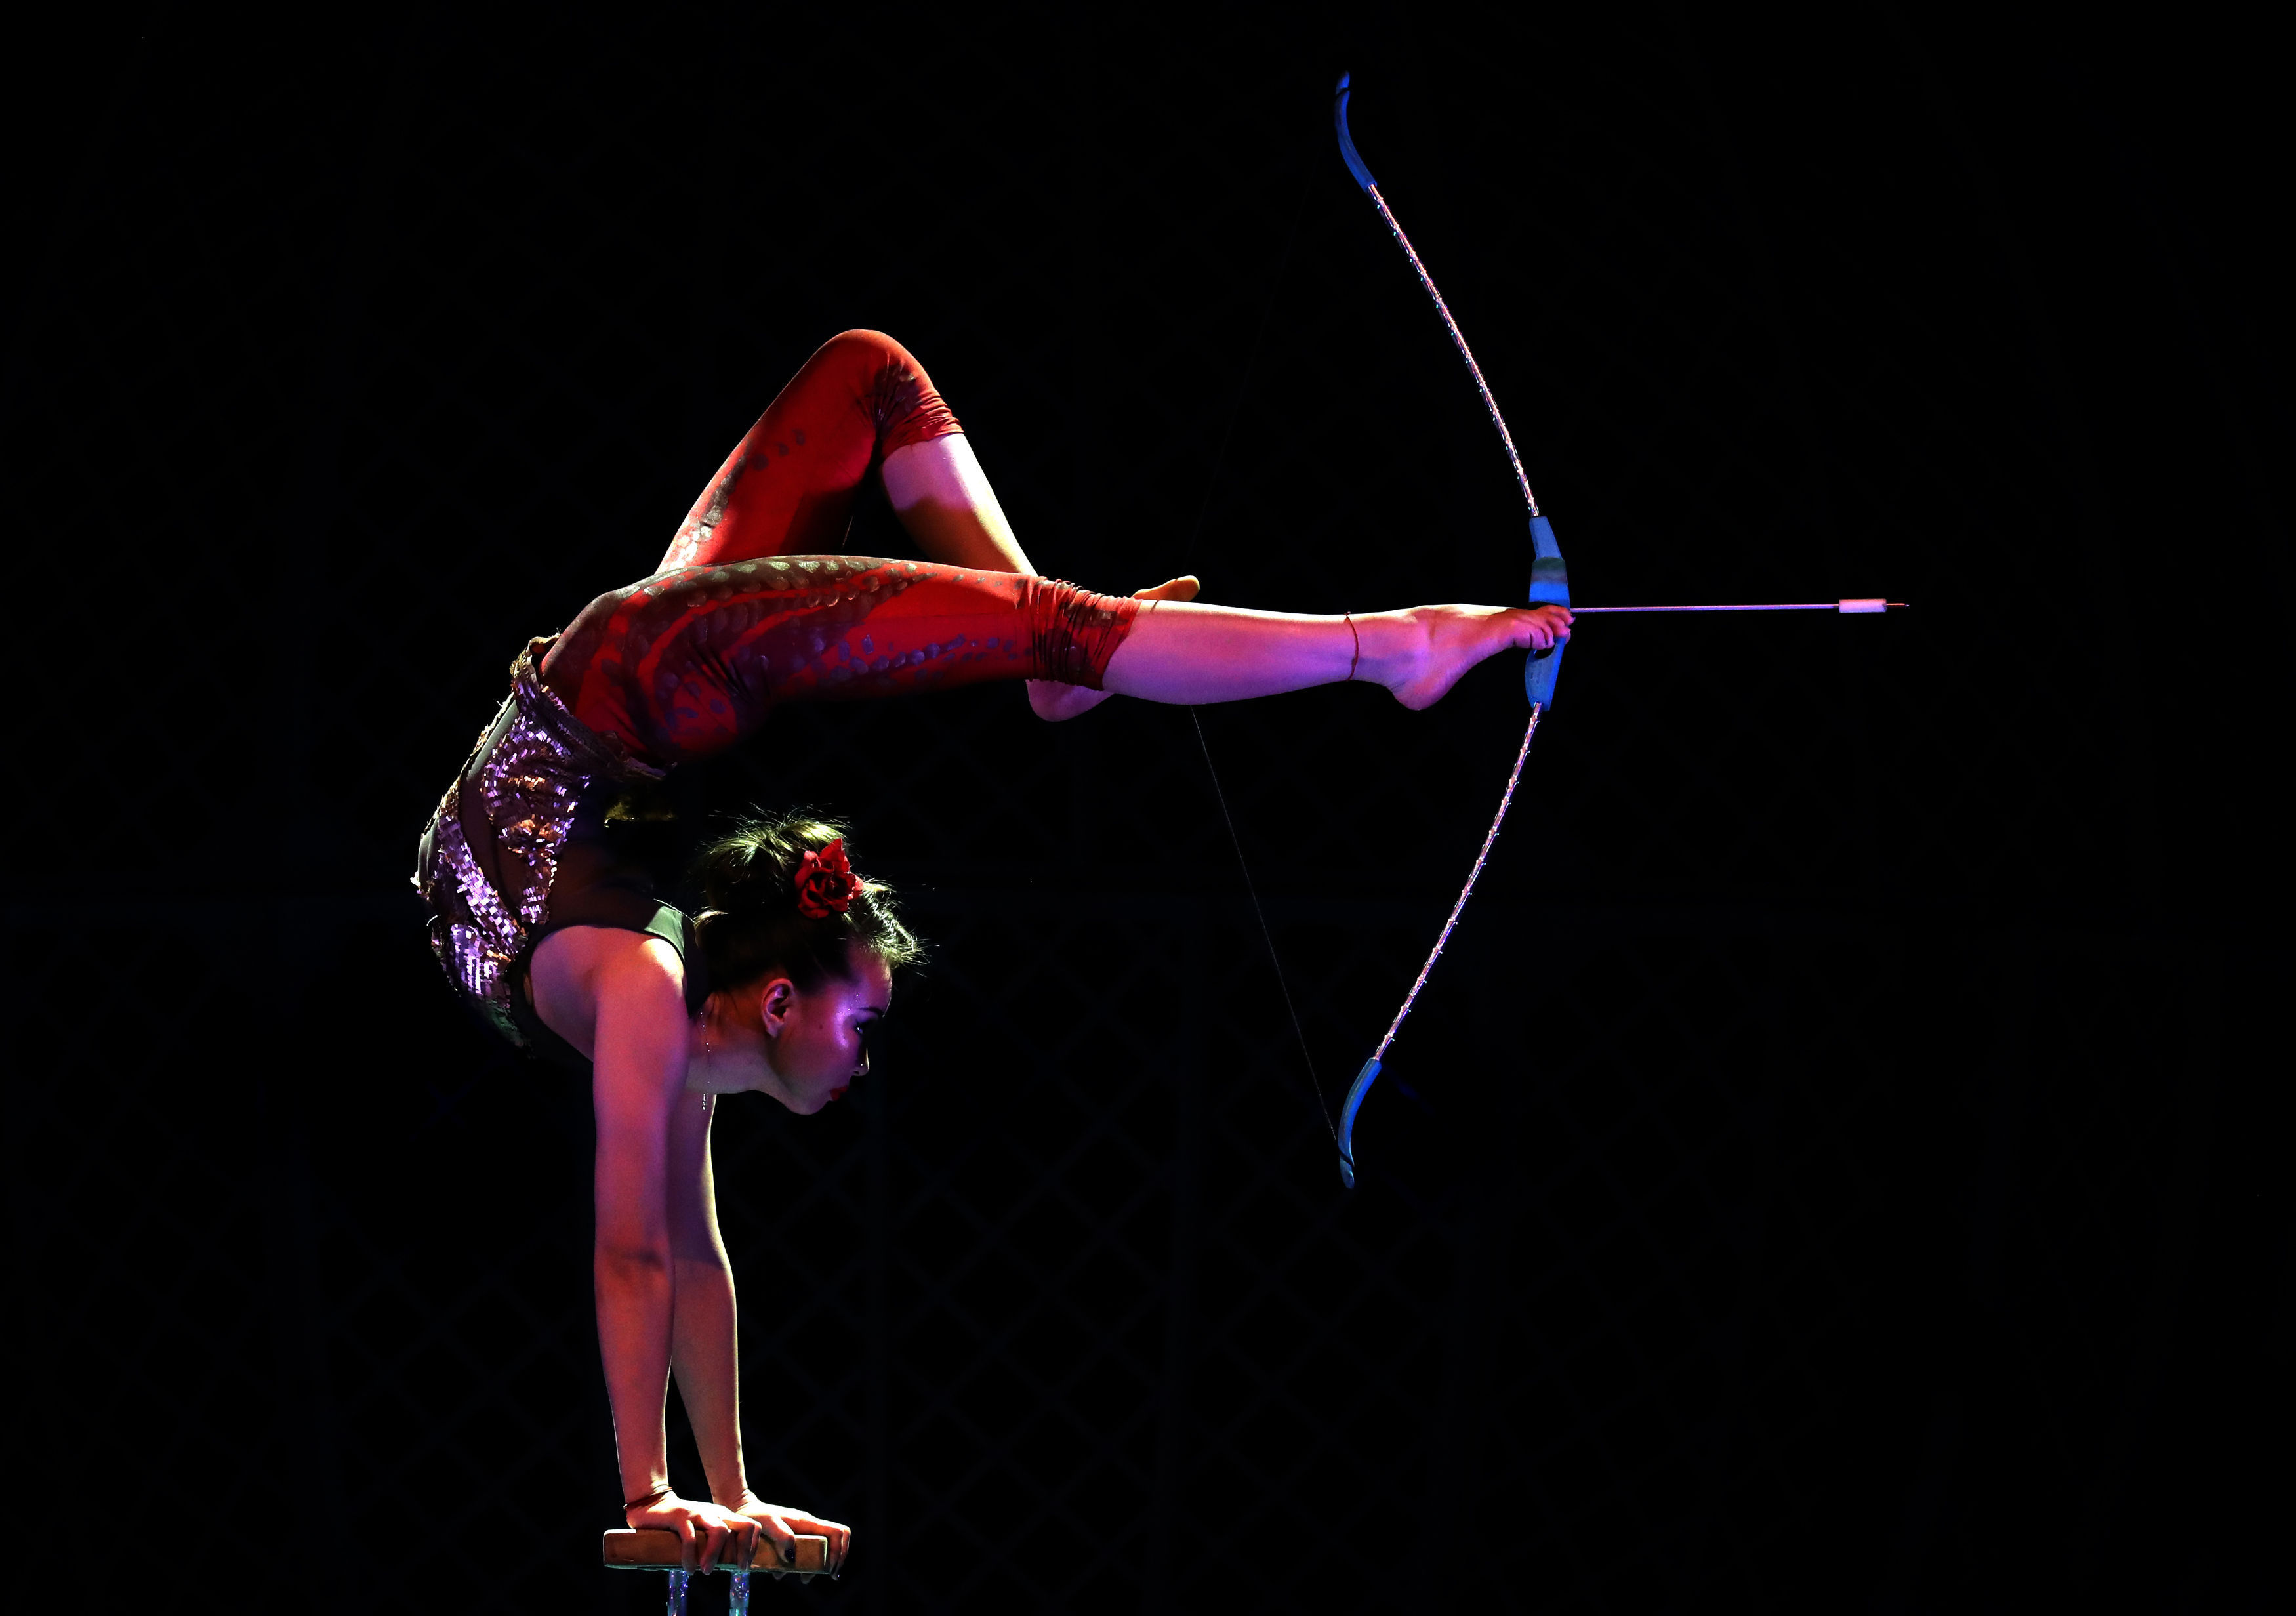 Contortionist Odka prepares to fire an arrow (Andrew Milligan/PA)